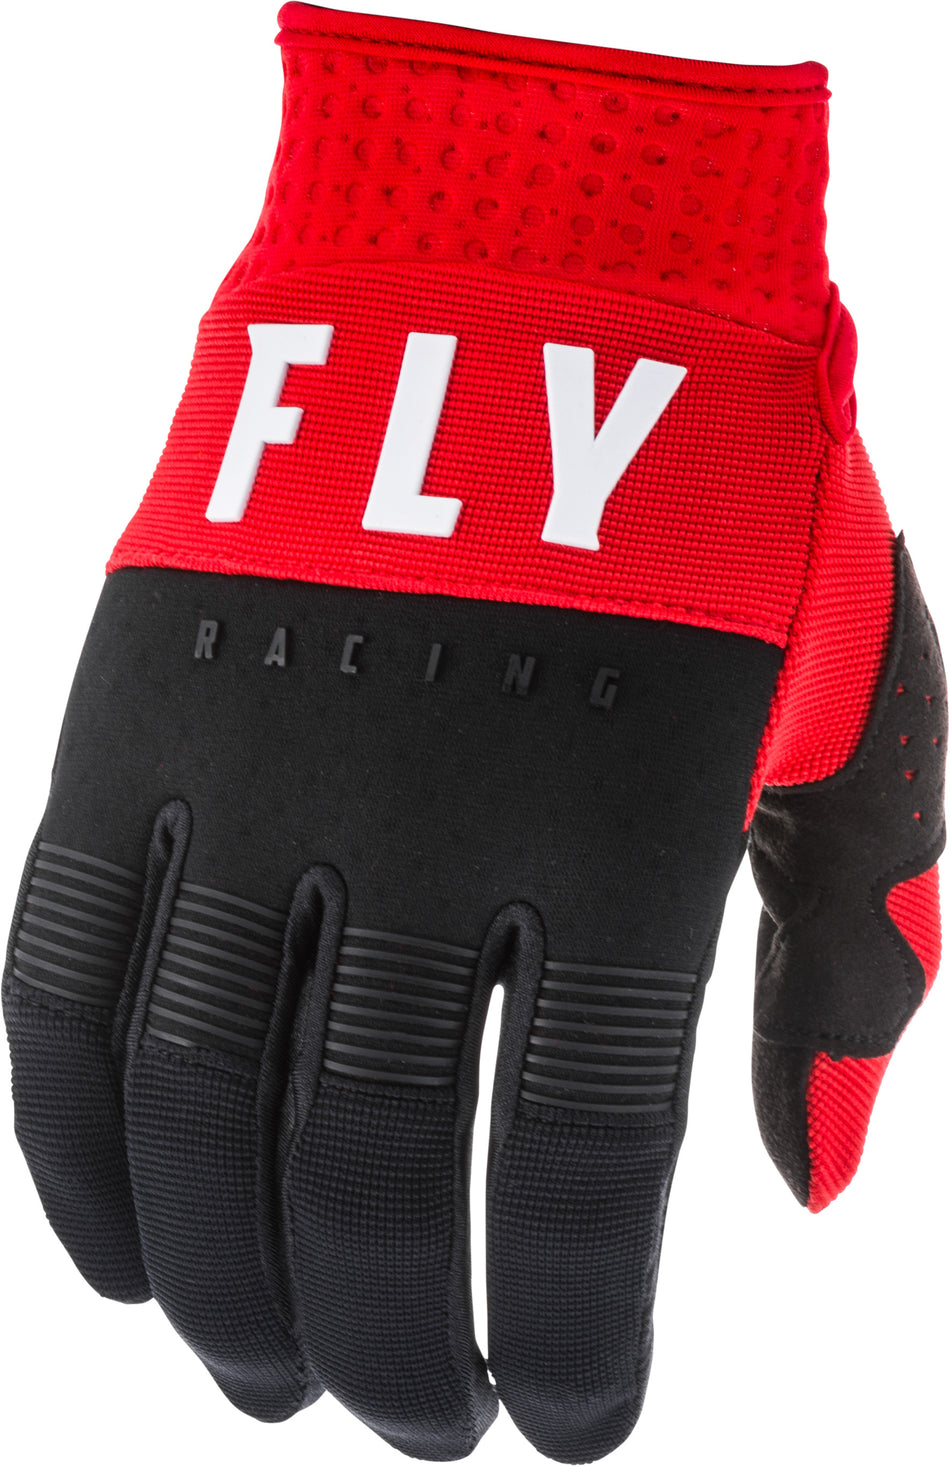 FLY RACING F-16 Gloves Red/Black/White Sz 06 373-91306